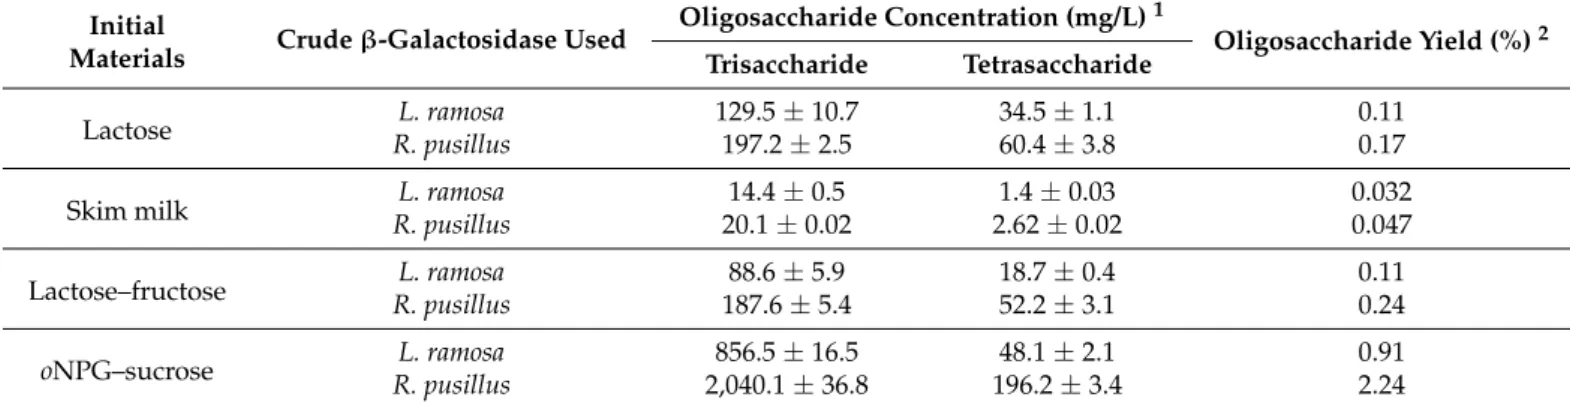 Table 2. Concentration and yield of oligosaccharides obtained with L. ramosa and R. pusillus β-galactosidase extracts (about 2400 units) on different initial materials.